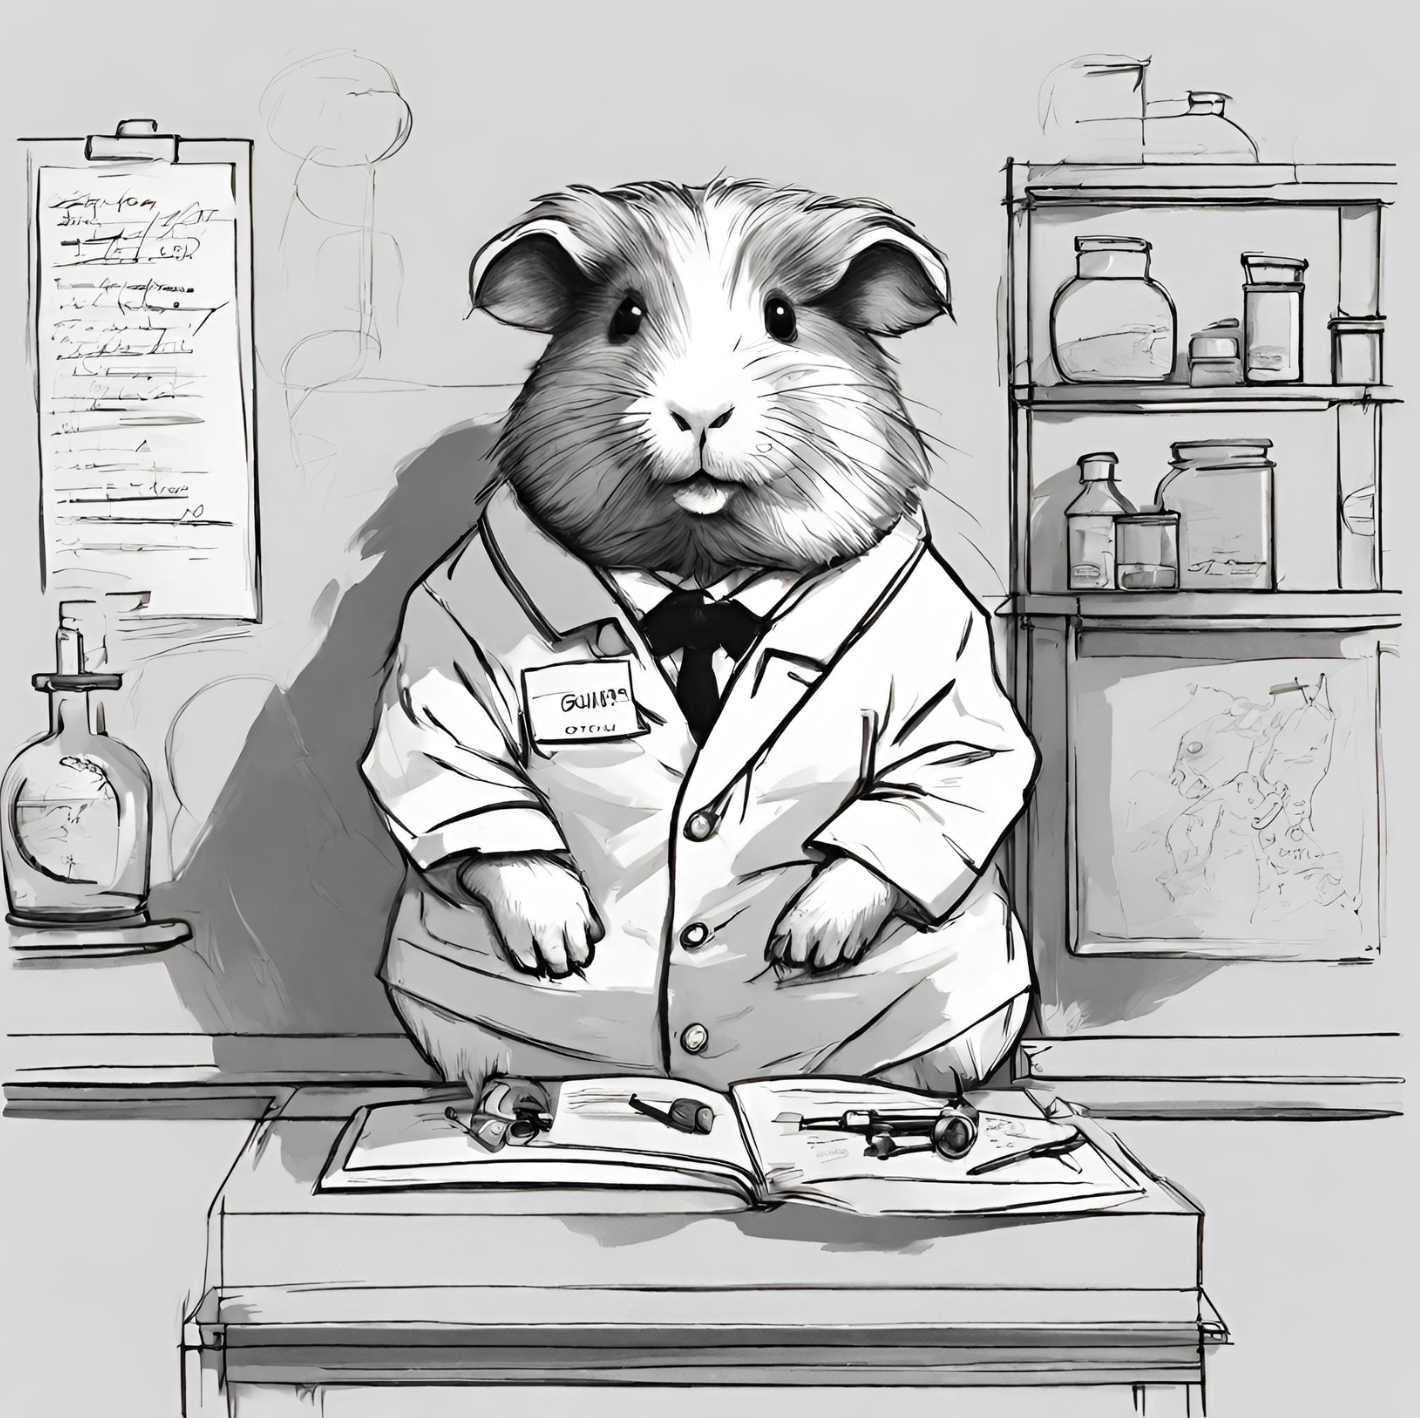 sketch of a guinea pig dressed up as a scientist in a science setting